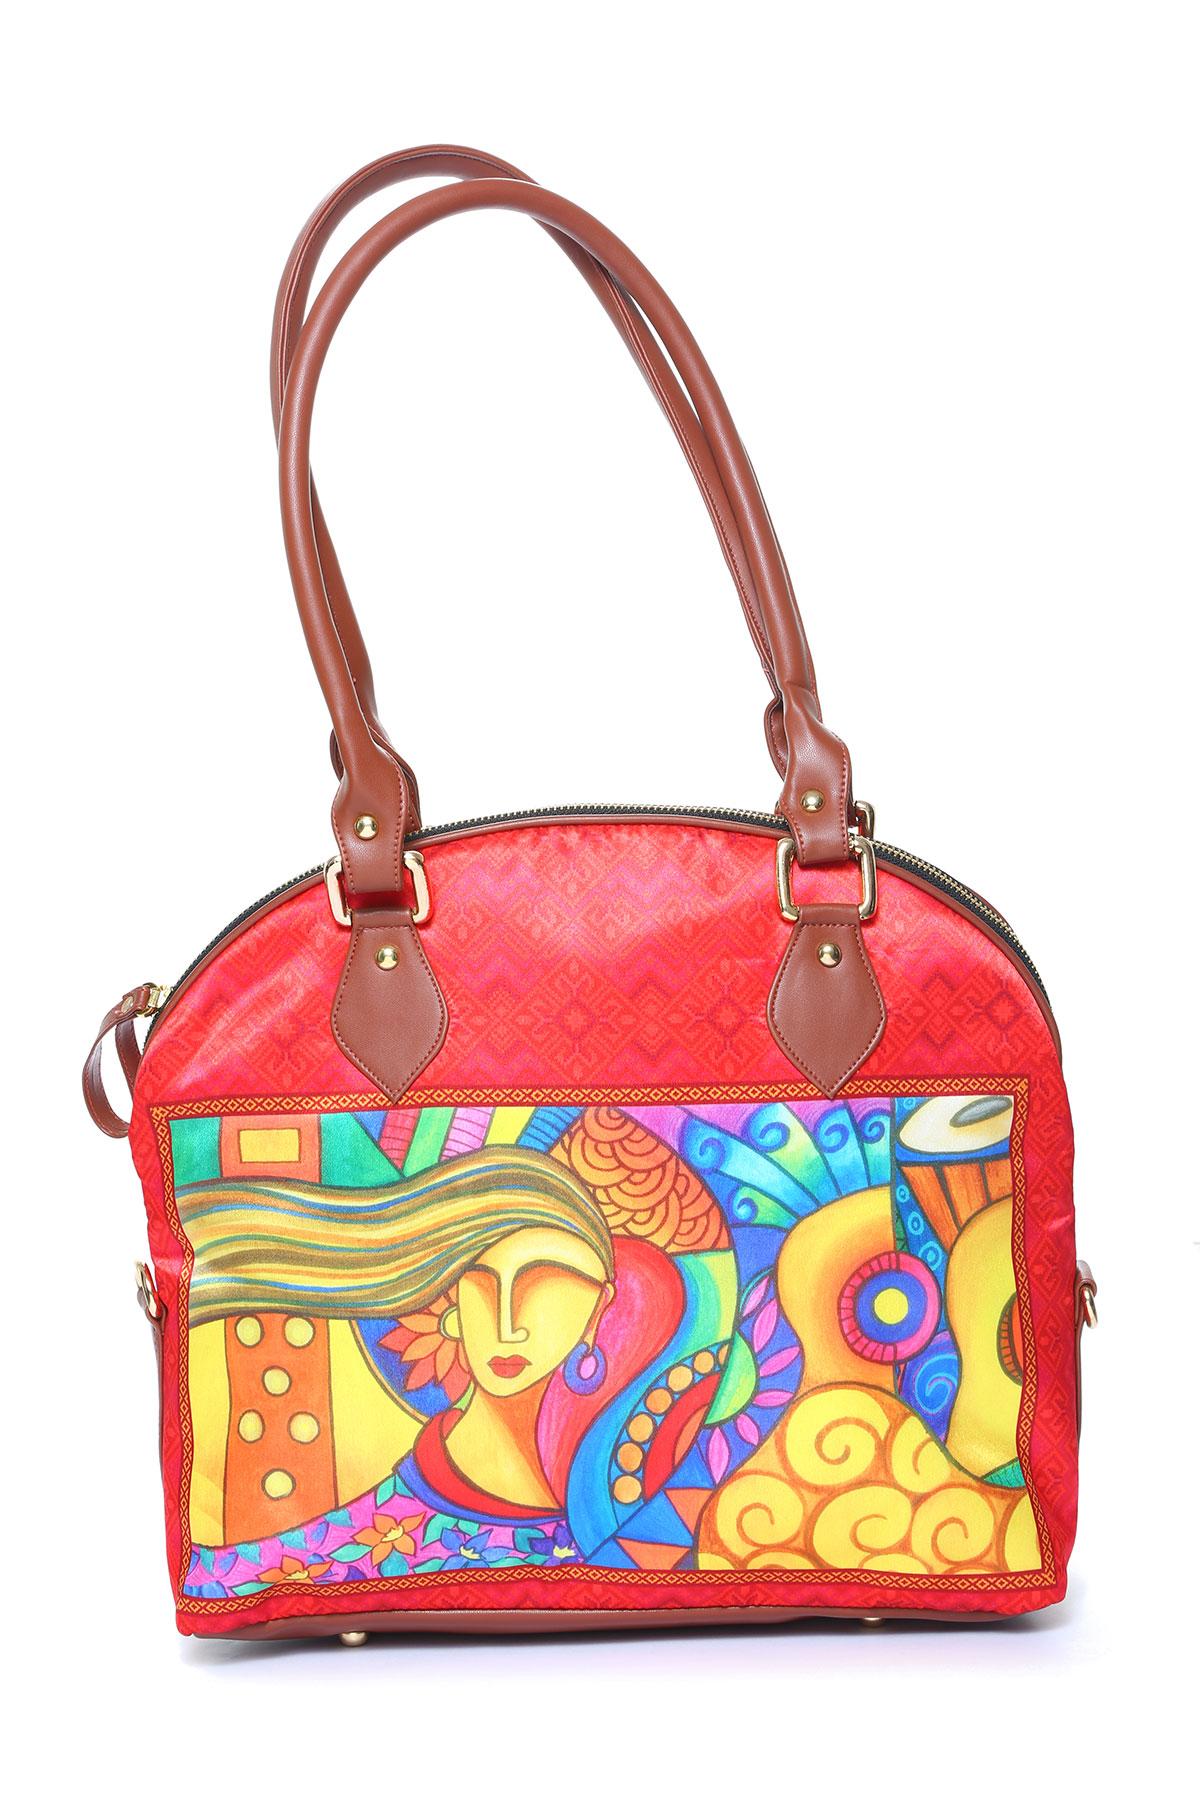 Buy Vivid by Sukriti Orange Traditional Fort Pattern Hand Painted Genuine  Leather Crossbody Bag at ShopLC.